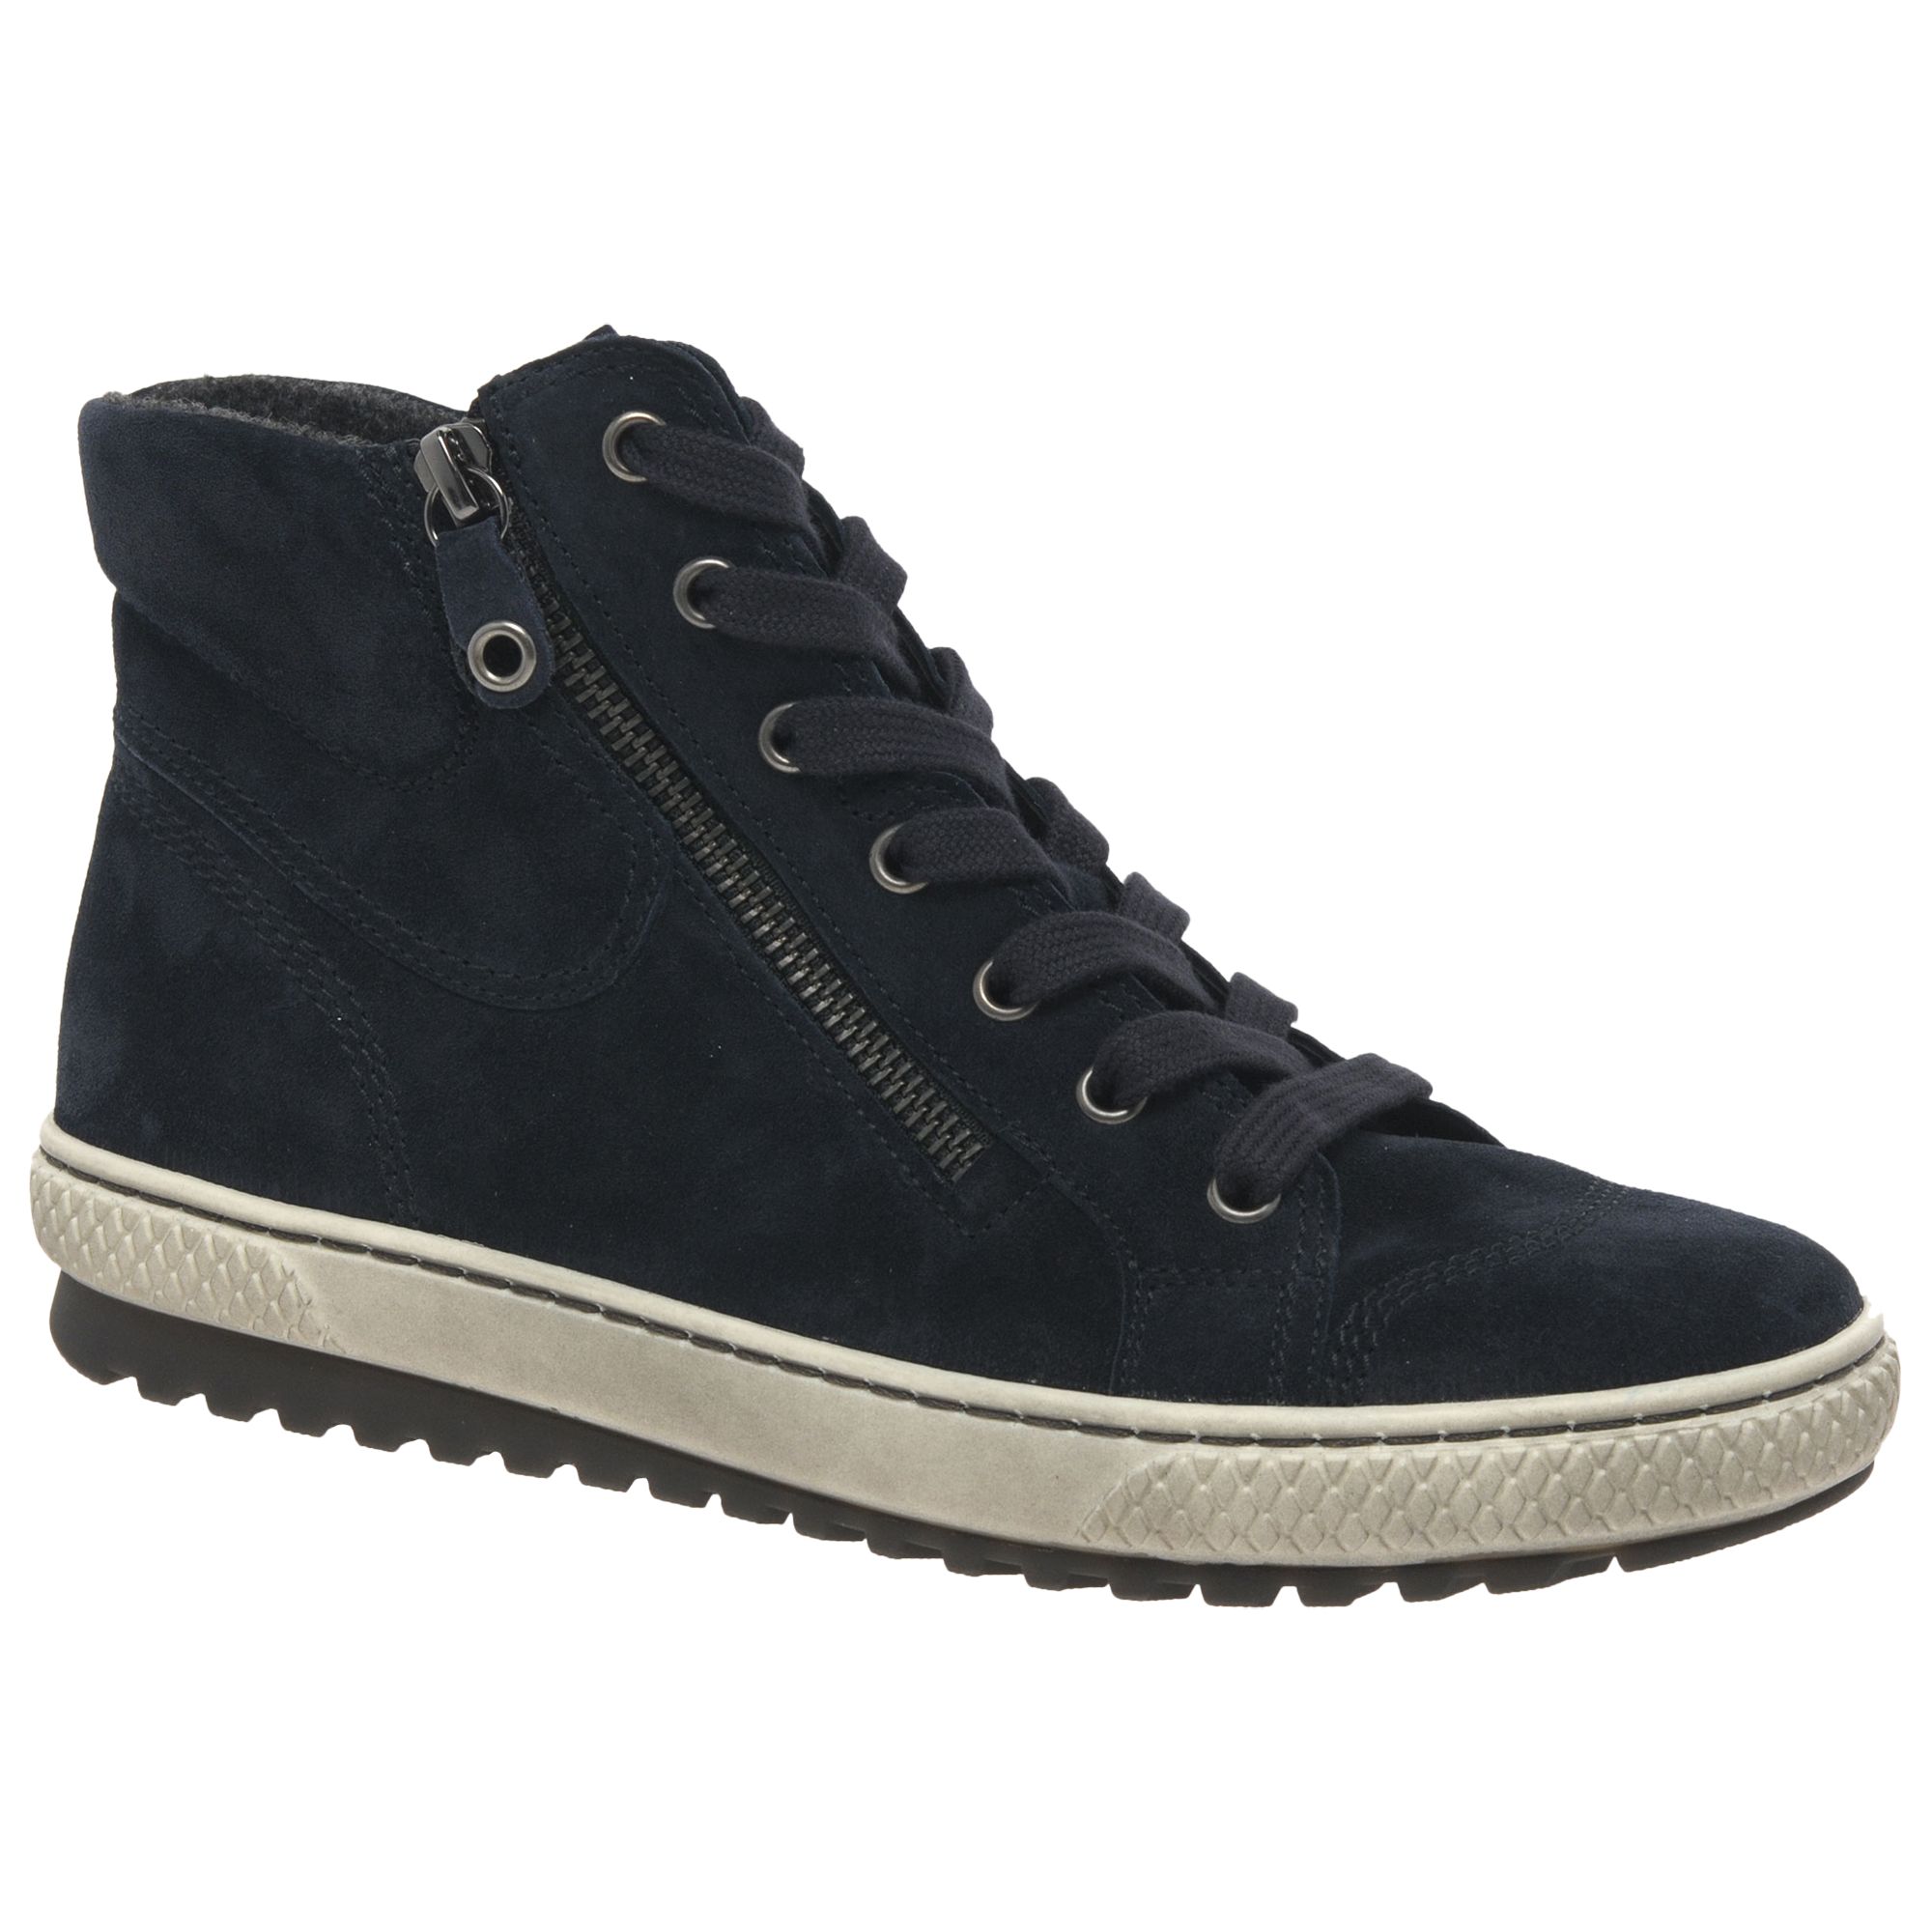 Gabor Bulner Wide High Top Lace Up Trainers at John Lewis & Partners